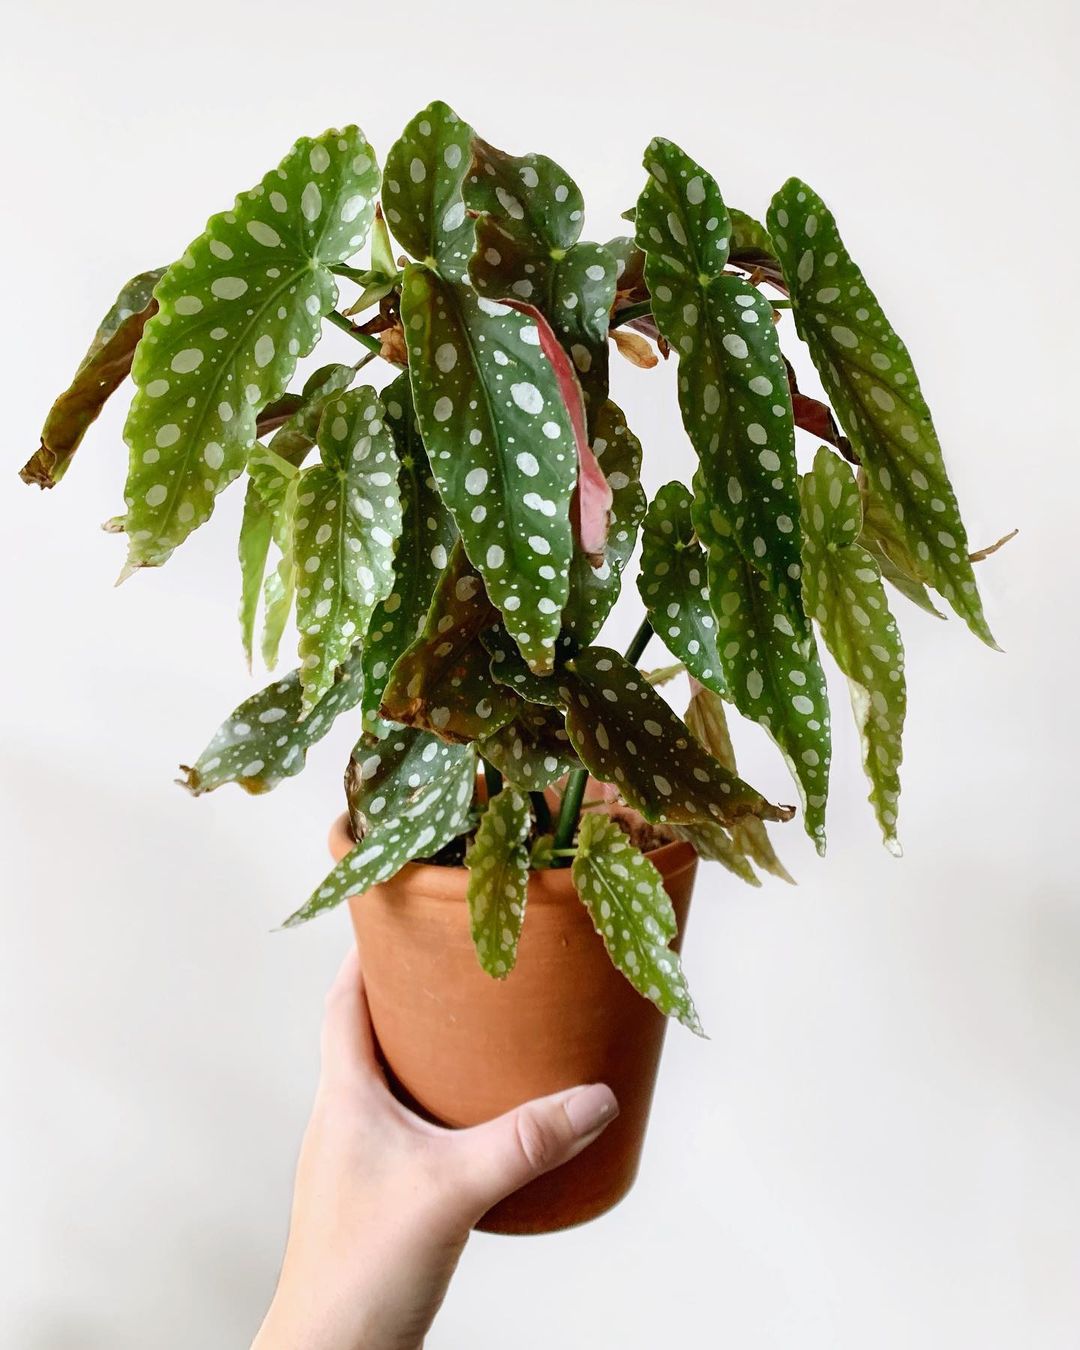 Polka Dot Begonia's cool spotted leaves making it one of the most popular indoor plants